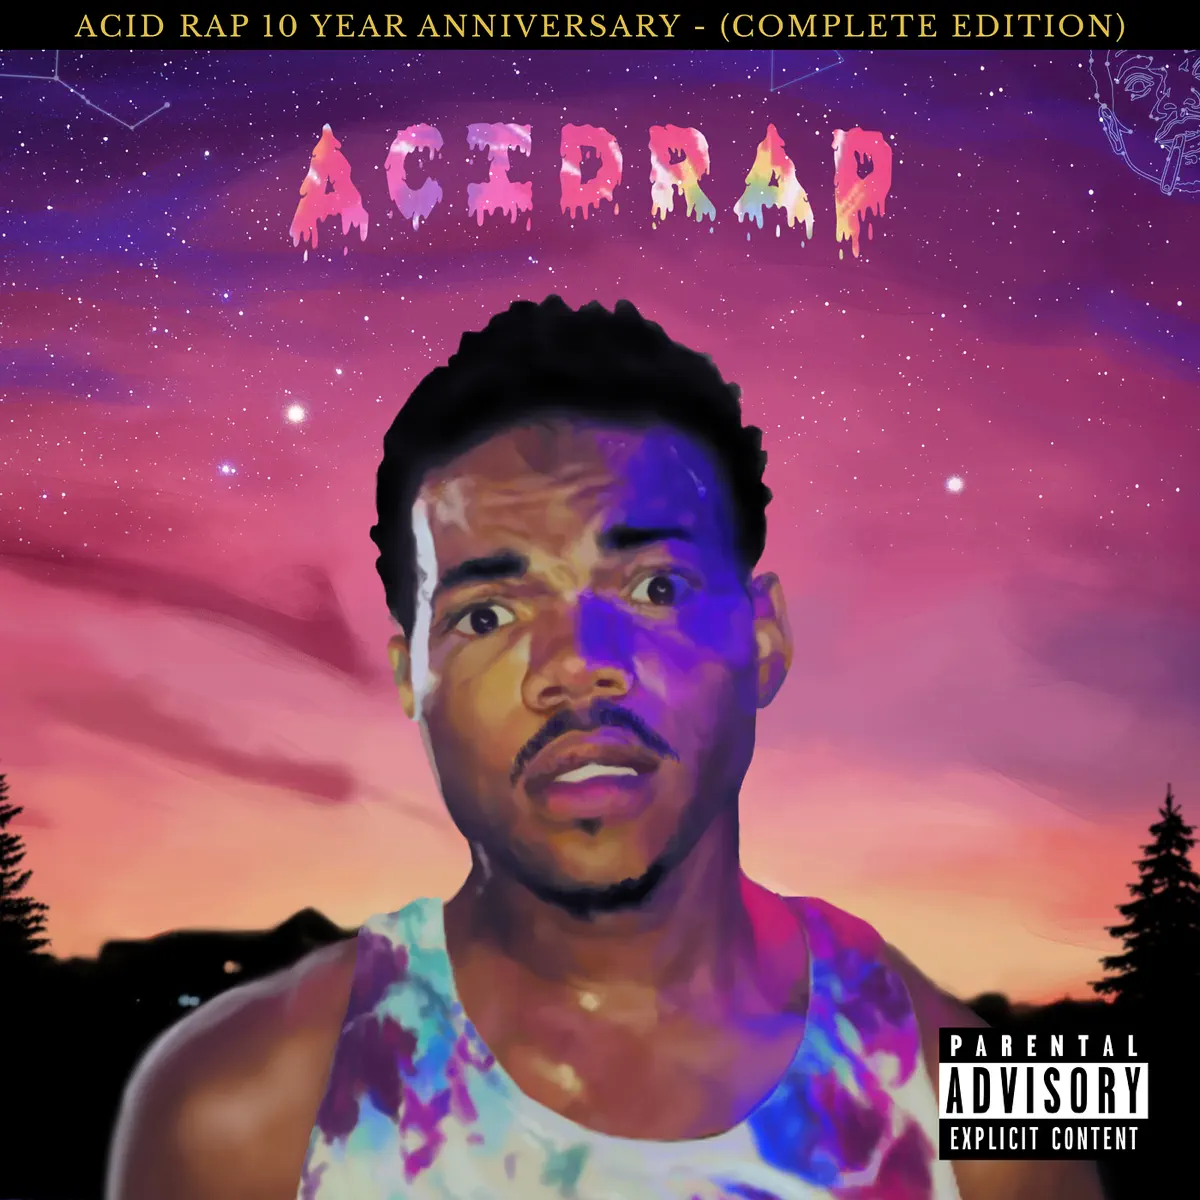 Chance the Rapper - Acid Rap (10th Anniversary) [Complete Edition] (2023) [iTunes Plus AAC M4A]-新房子